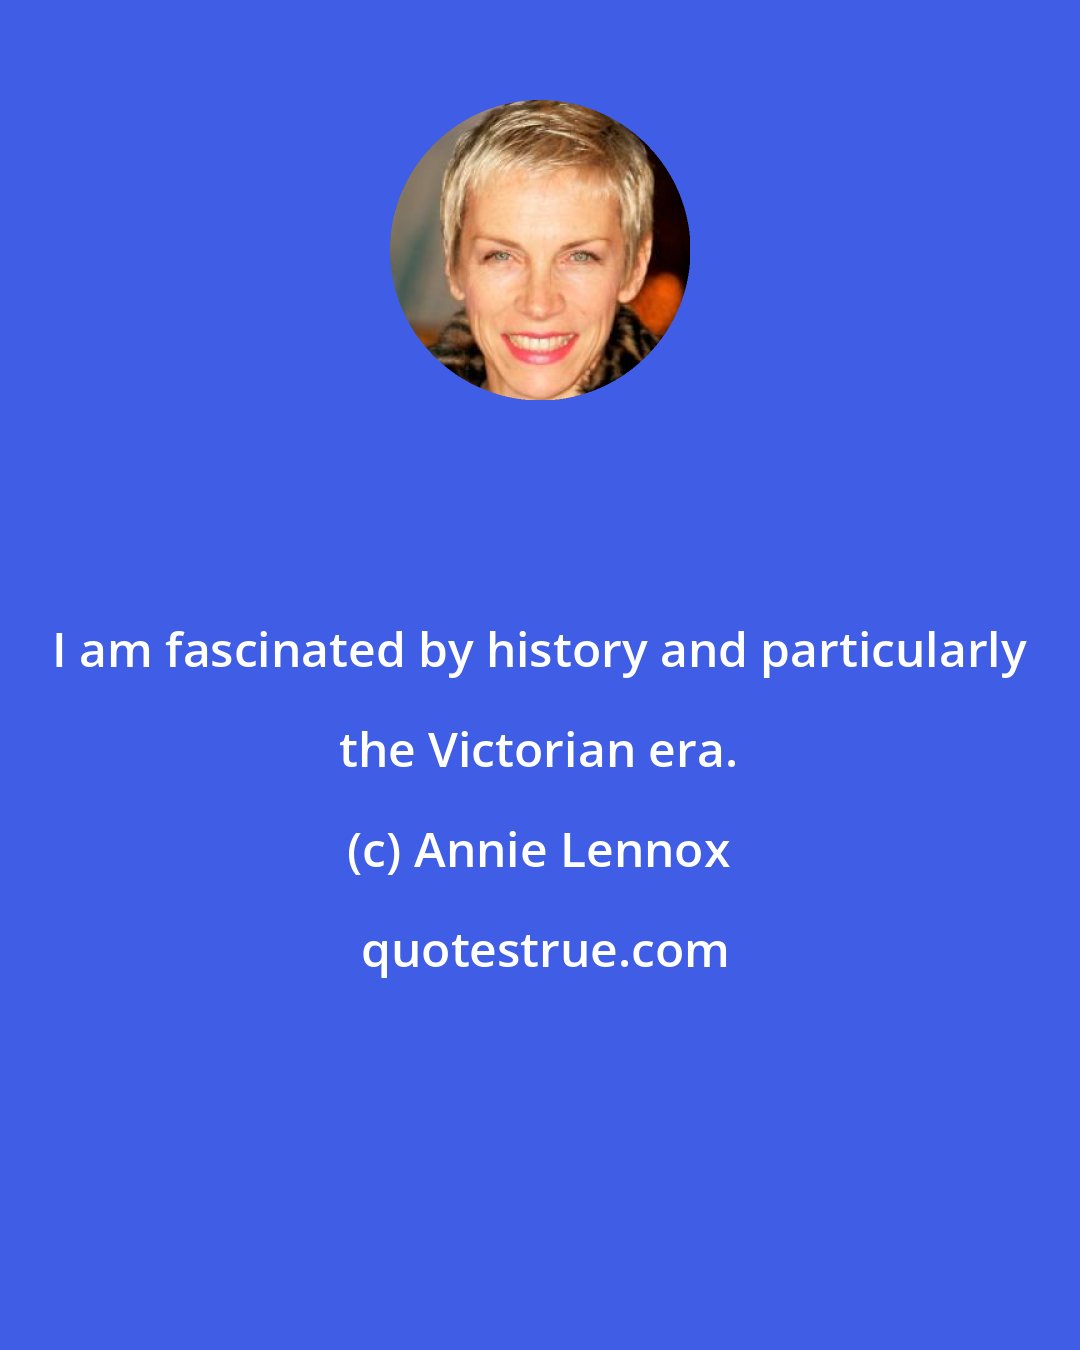 Annie Lennox: I am fascinated by history and particularly the Victorian era.